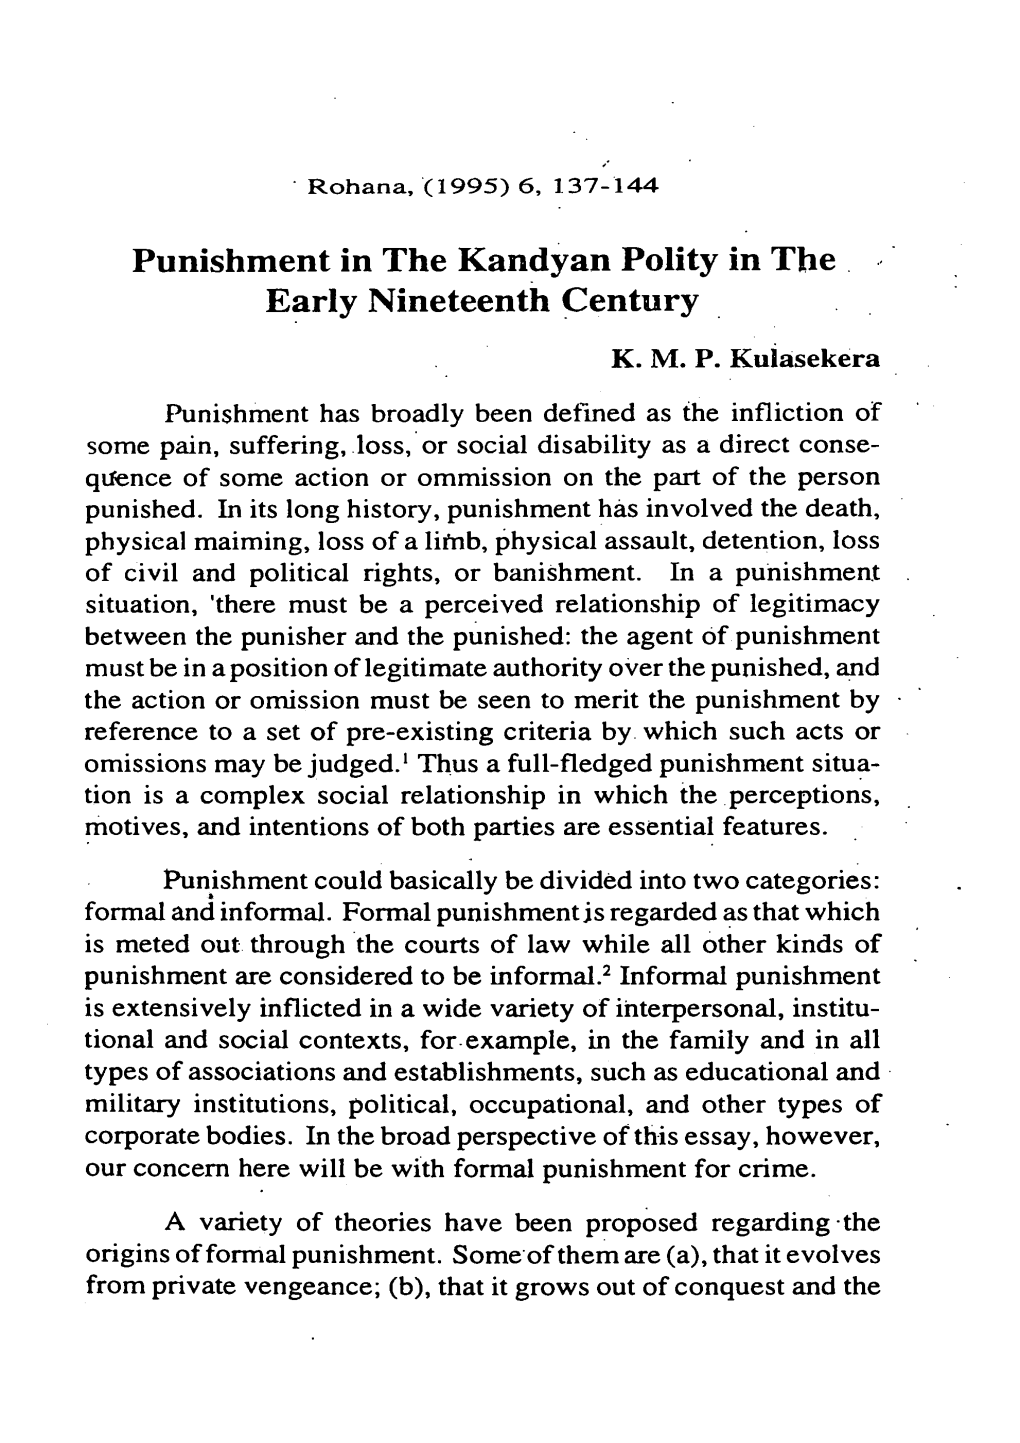 Punishment in the Kandyan Polity in the Early Nineteenth Century